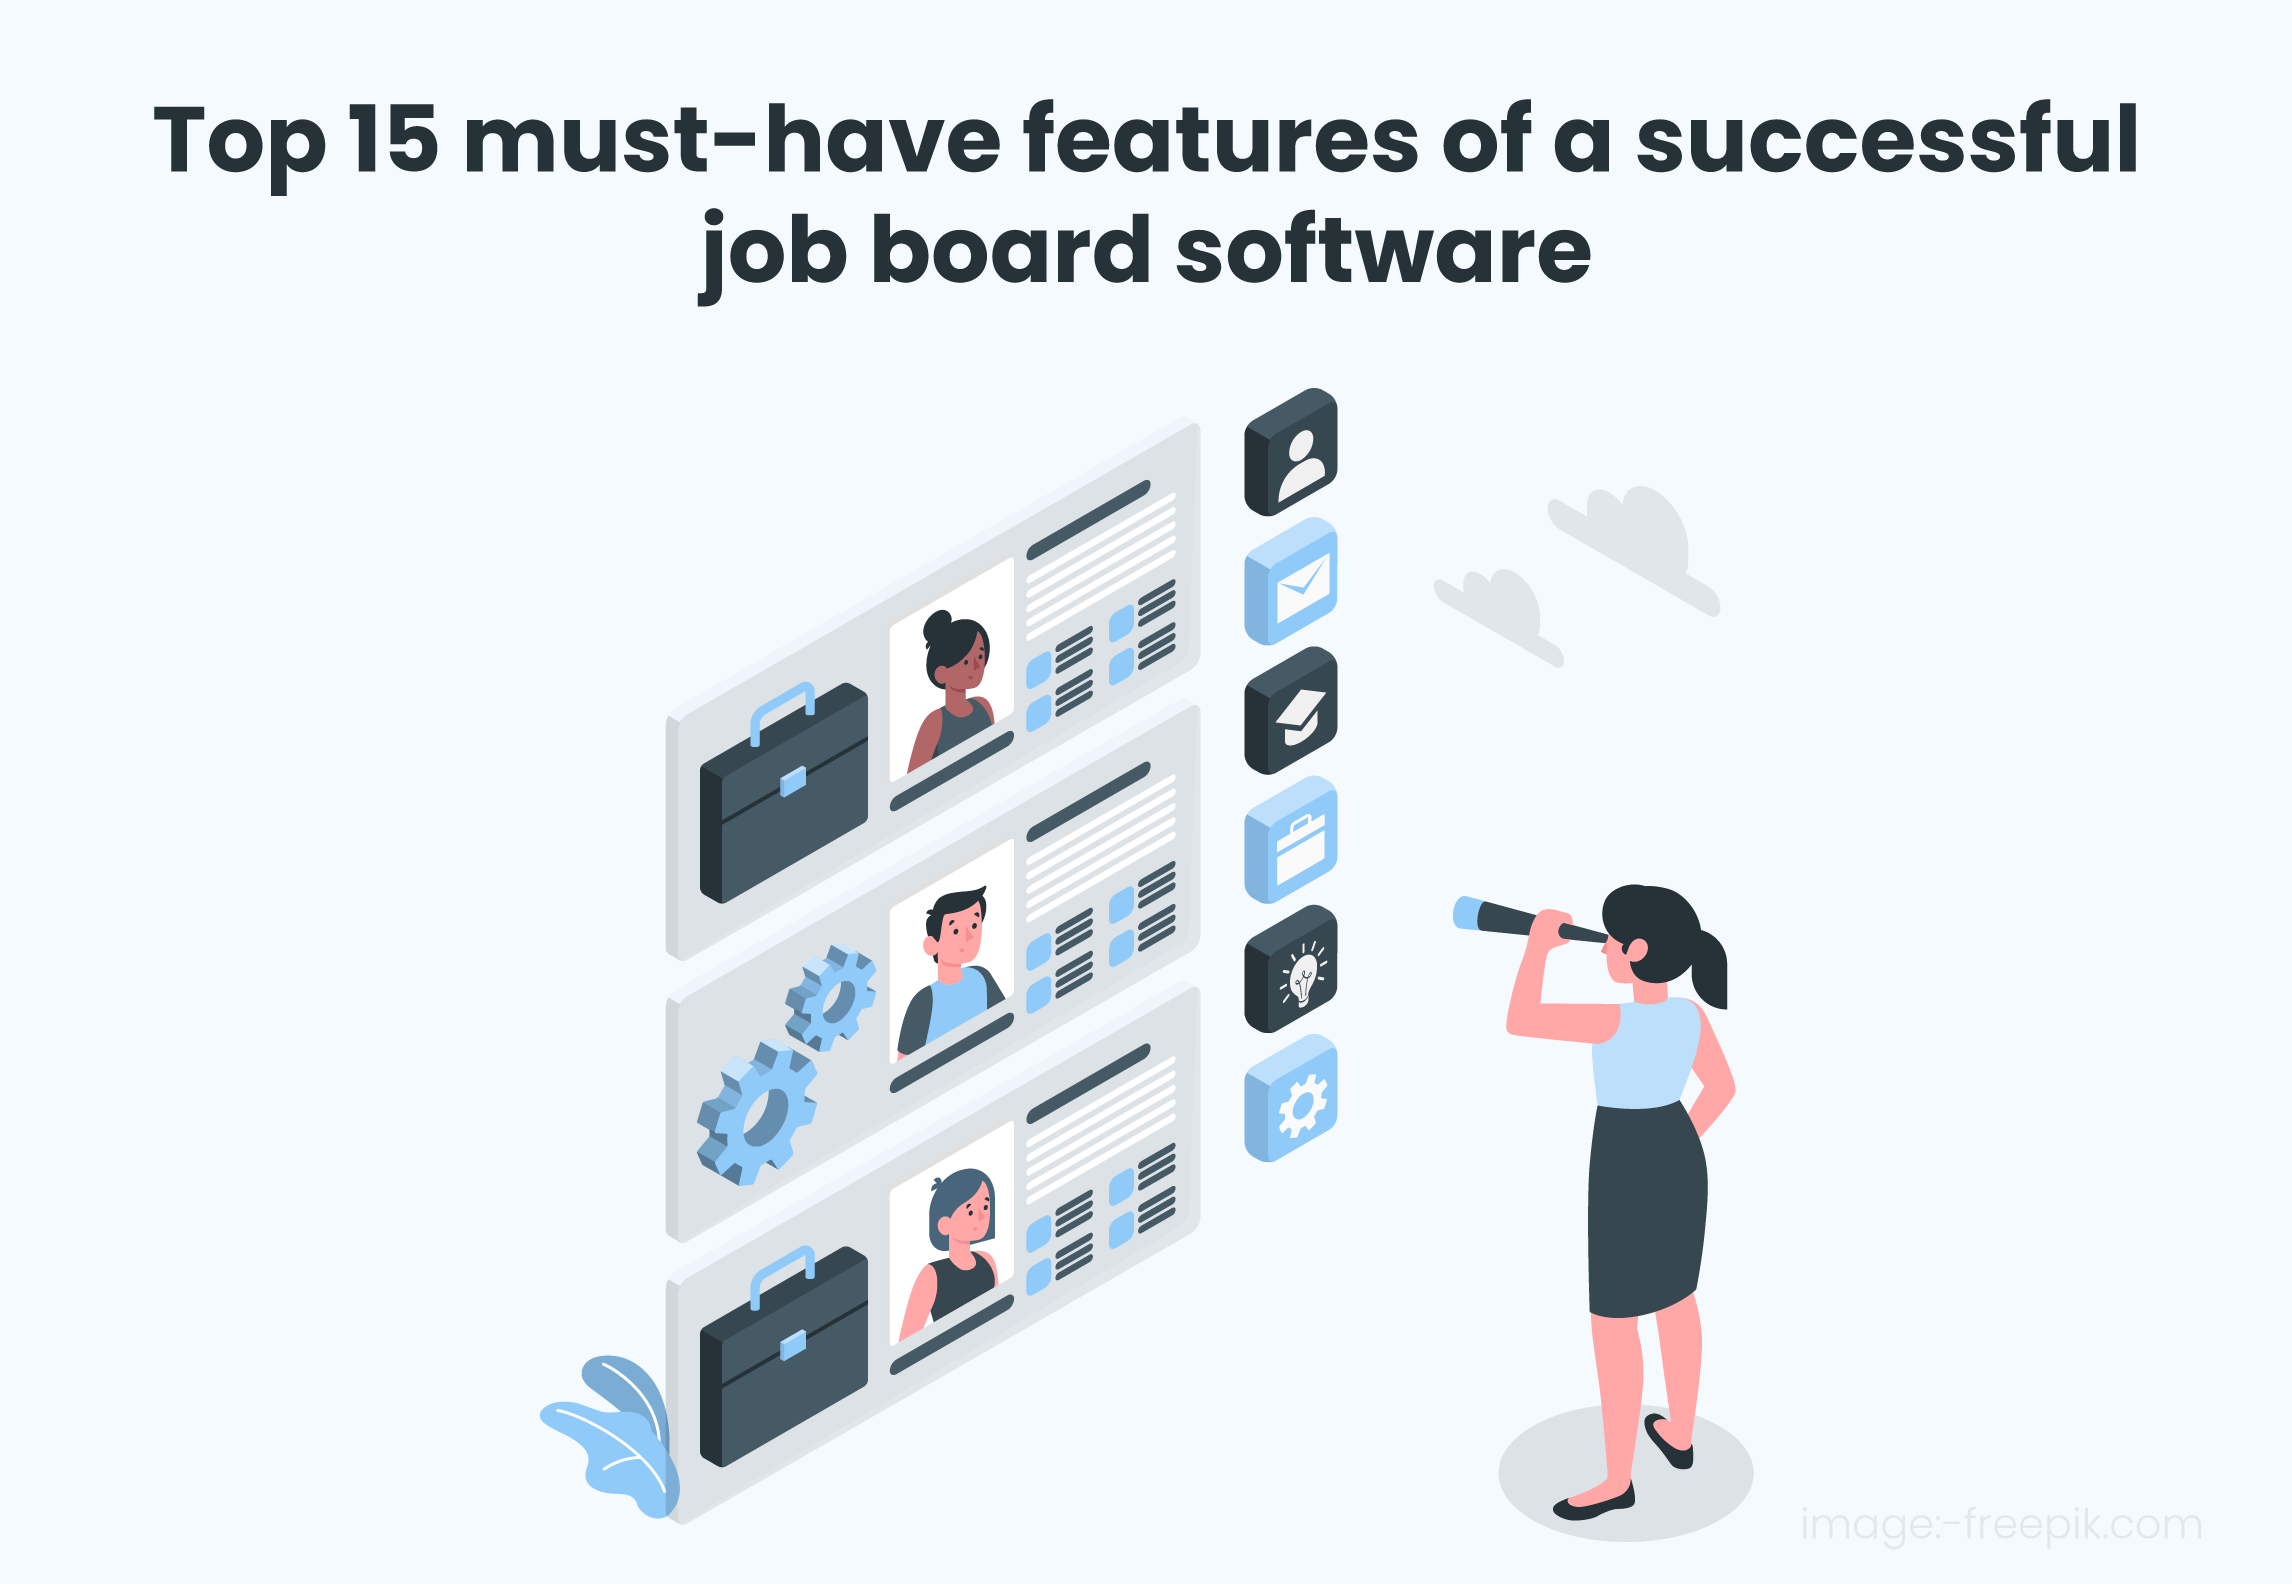 Top 15 must-have features of a successful job board software